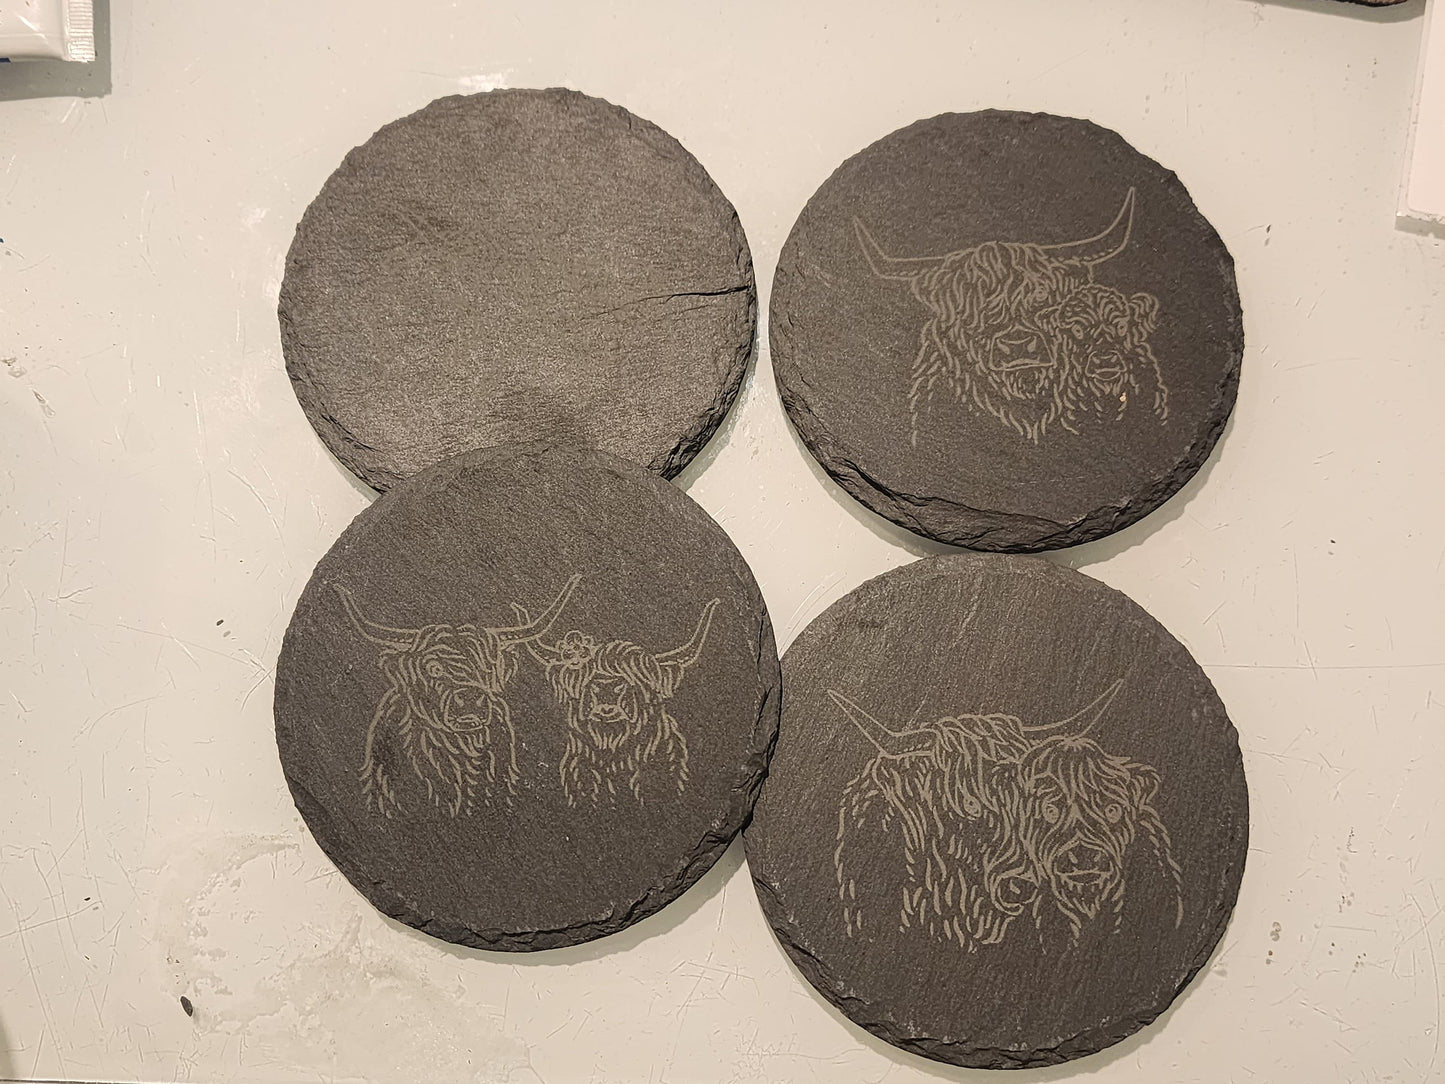 Highland cow etched Slate coasters, set of 4, four different designs